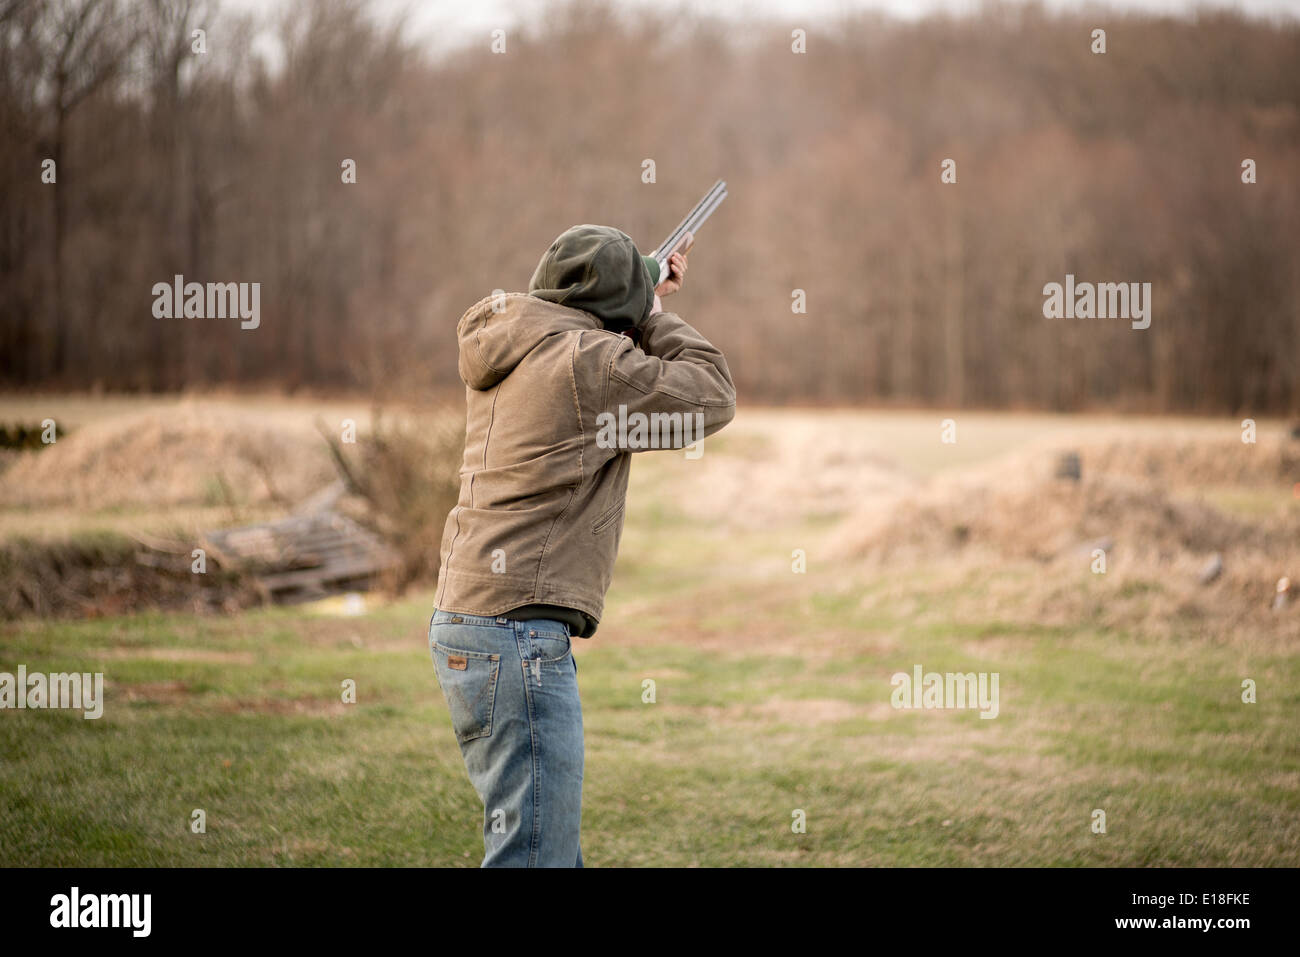 Young man holding rifle, aiming for a clay disc in Bel Air, Maryland,USA Stock Photo